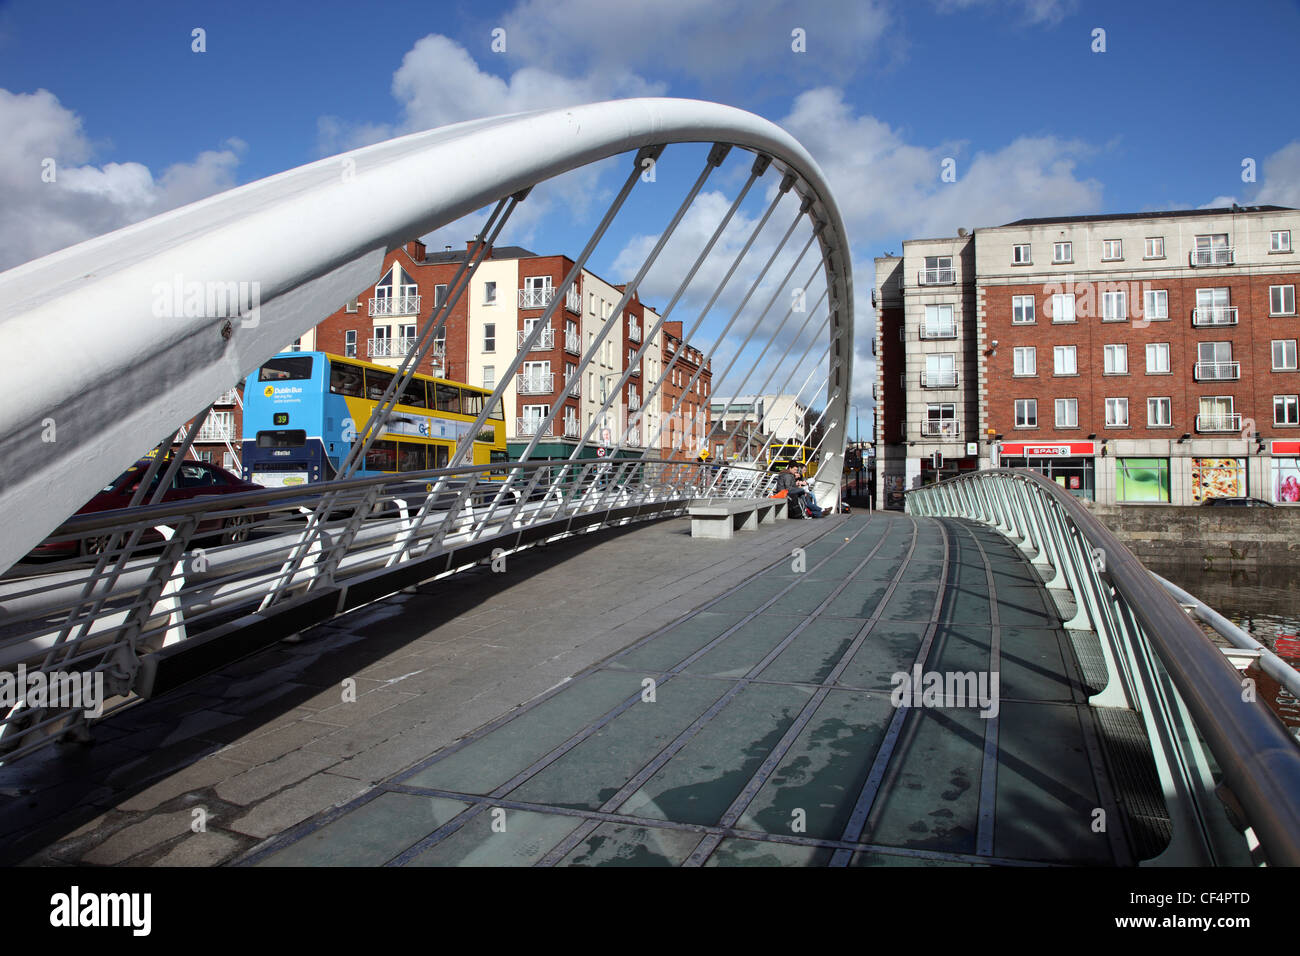 Looking north over James Joyce Bridge, a single span road bridge joining Usher's Island to North Quays over the River Liffey. Th Stock Photo